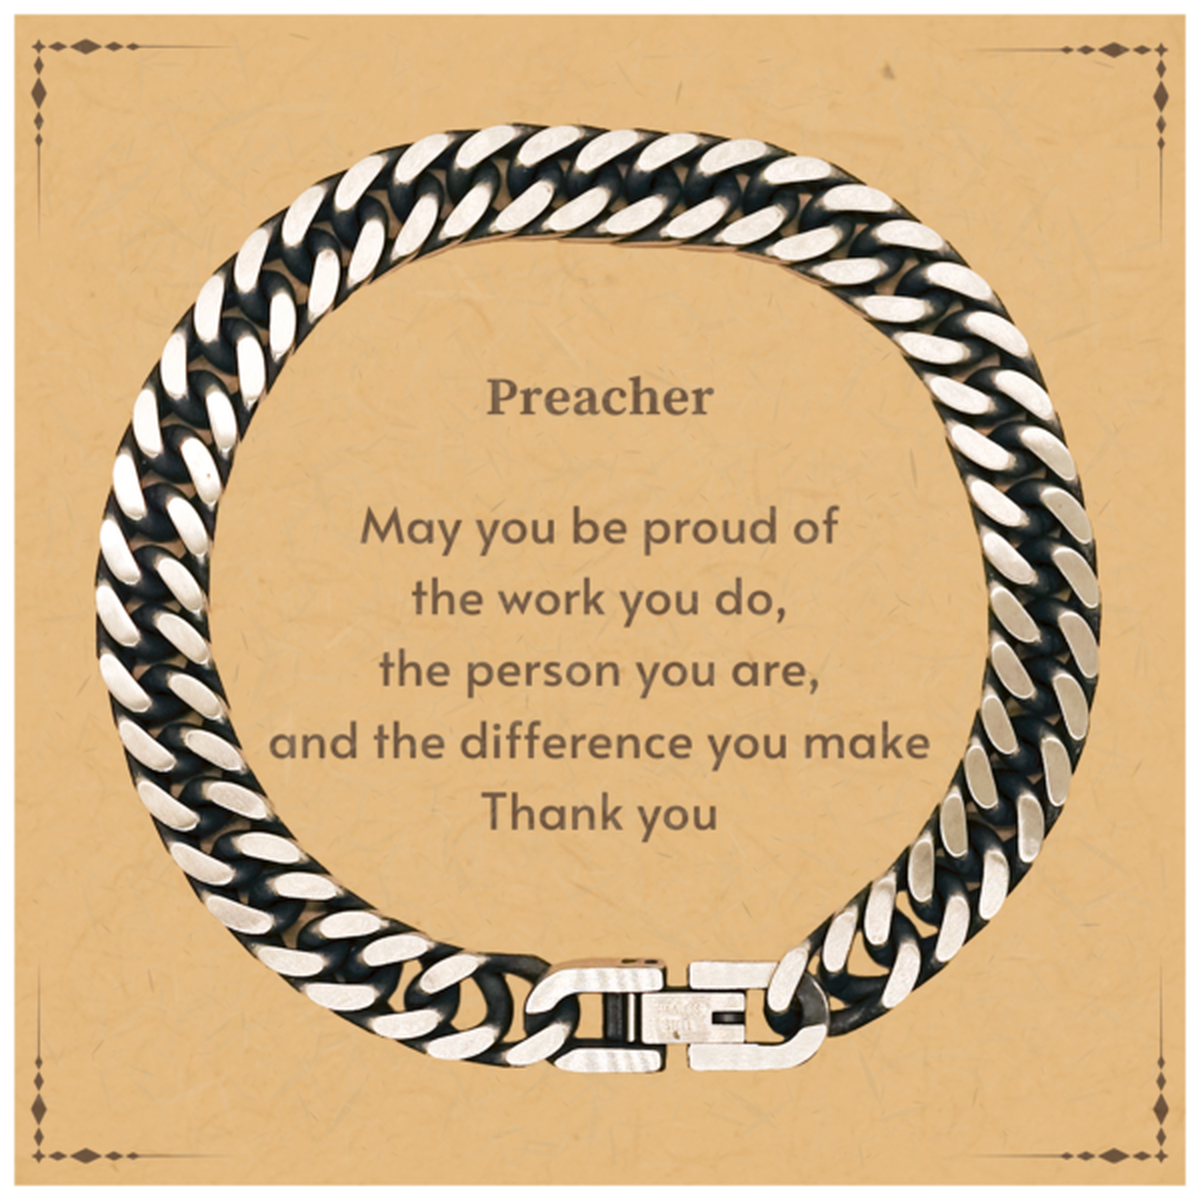 Heartwarming Cuban Link Chain Bracelet Retirement Coworkers Gifts for Preacher, Preacher May You be proud of the work you do, the person you are Gifts for Boss Men Women Friends